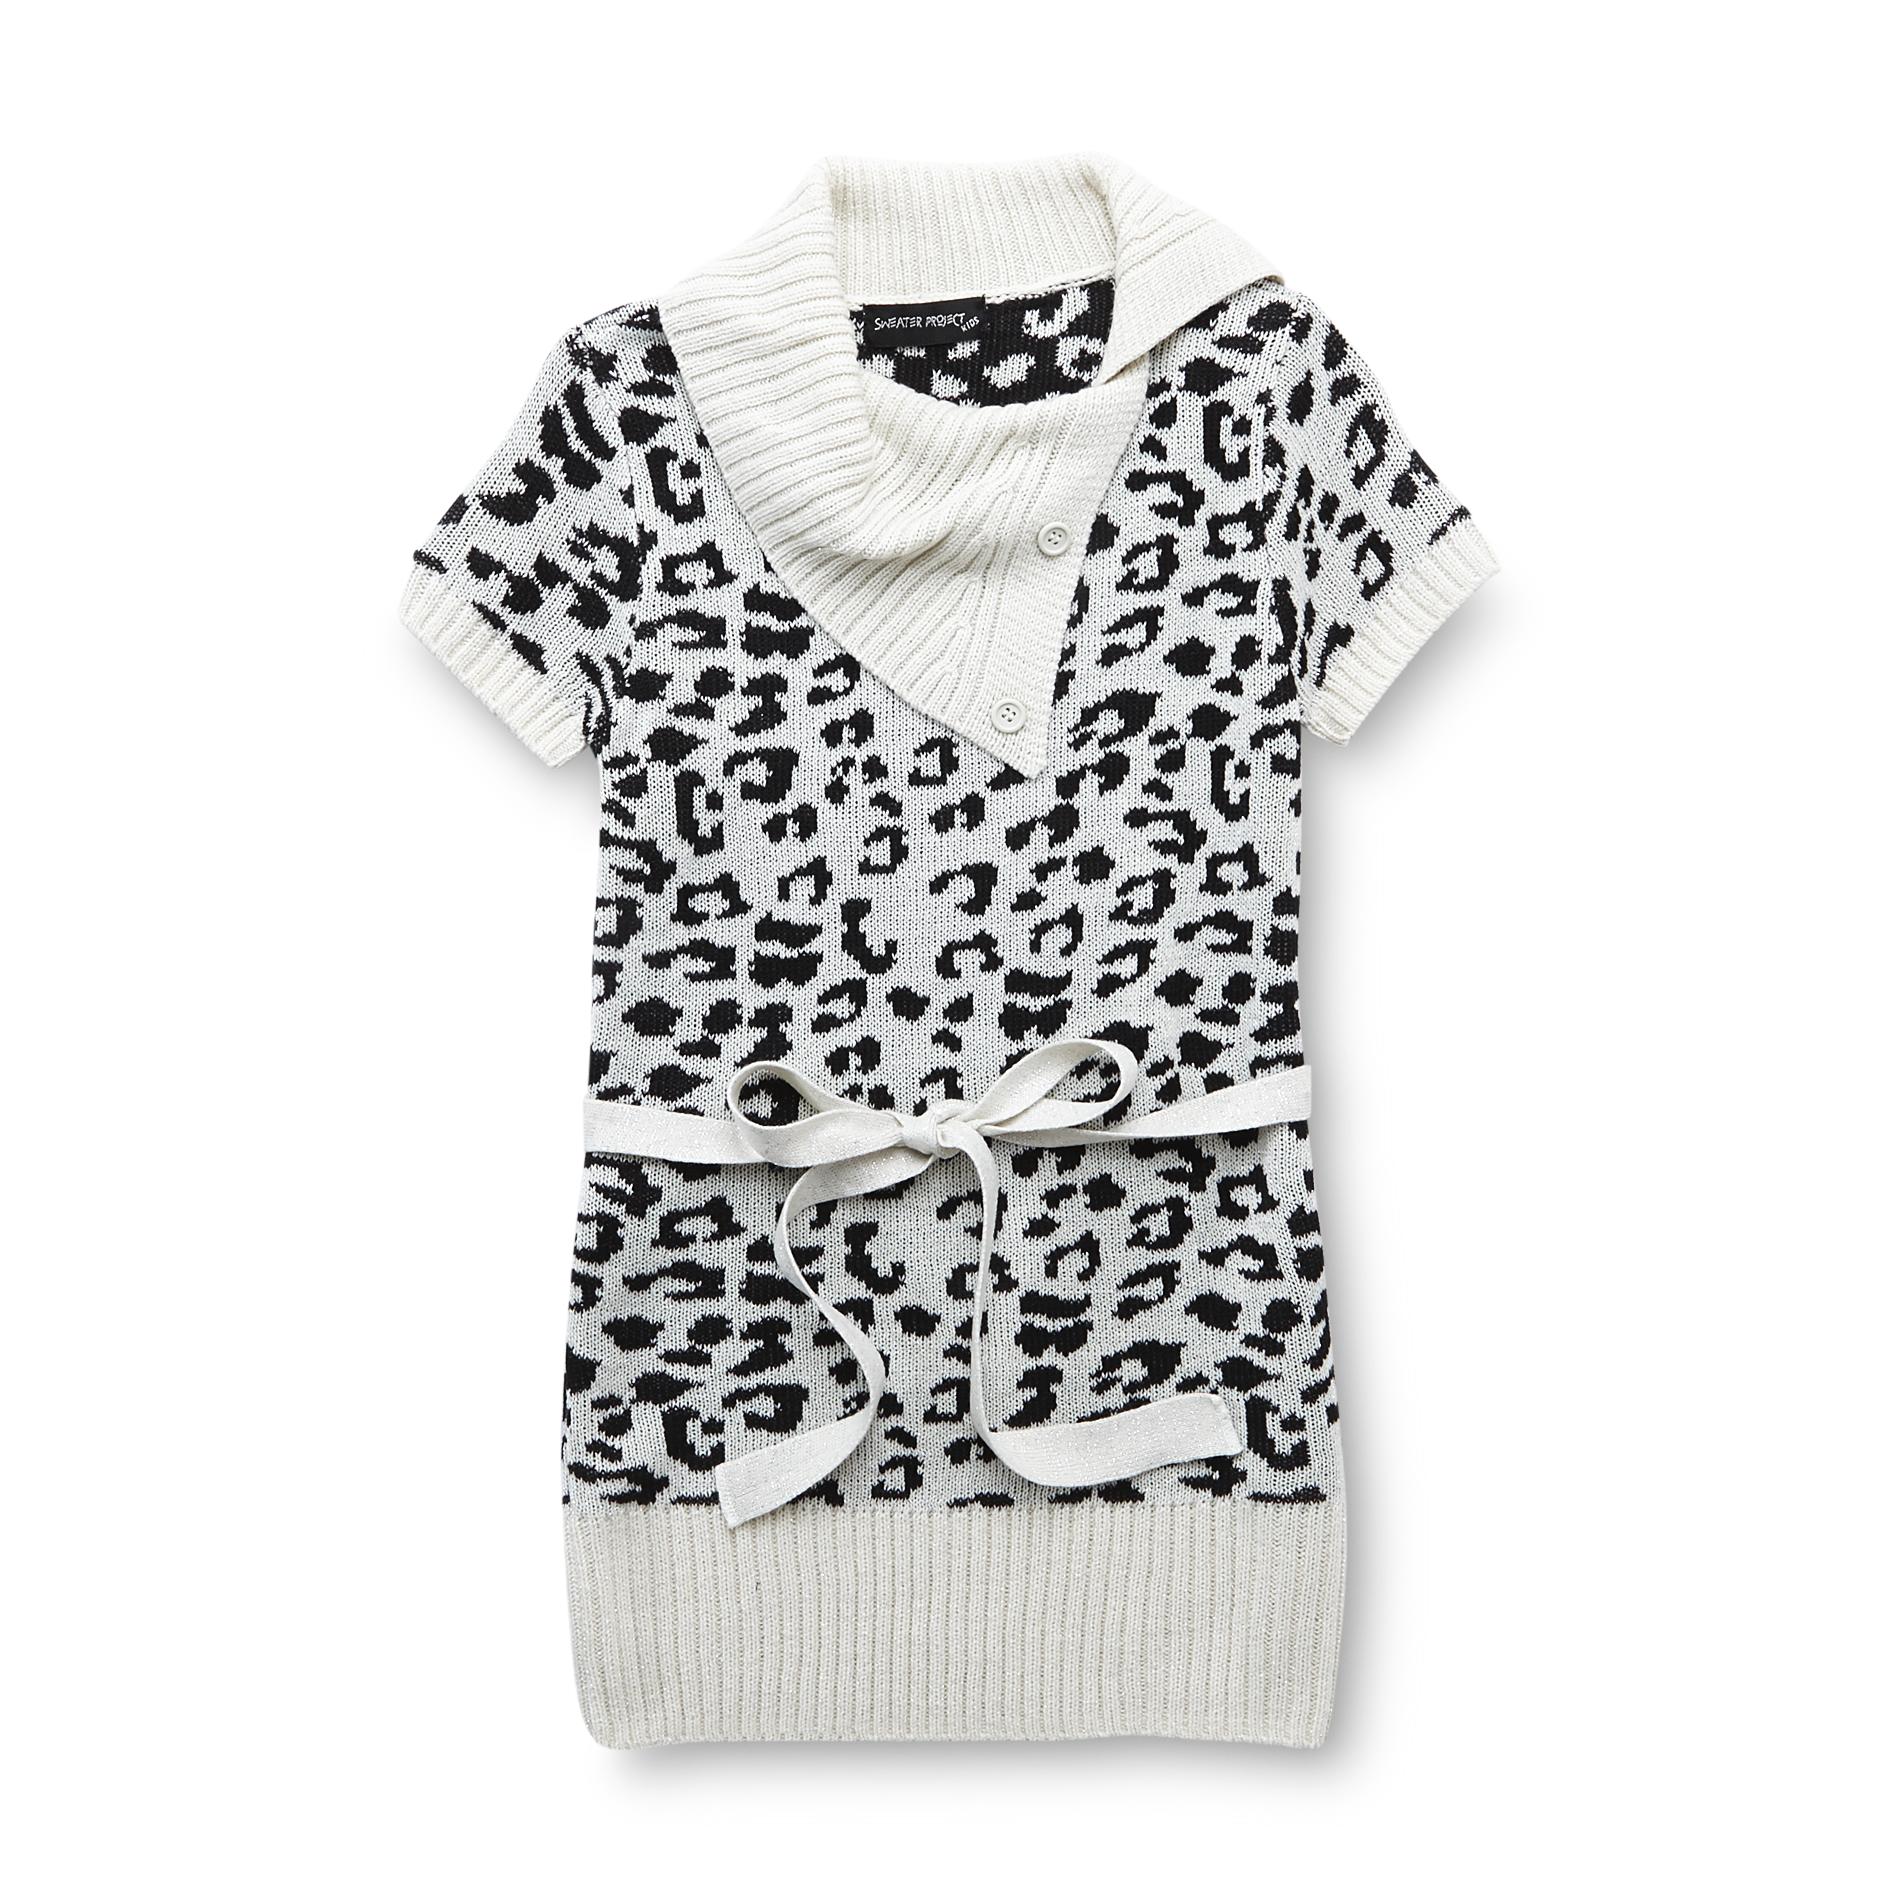 Sweater Project Girl's Belted Tunic Sweater - Leopard-Print